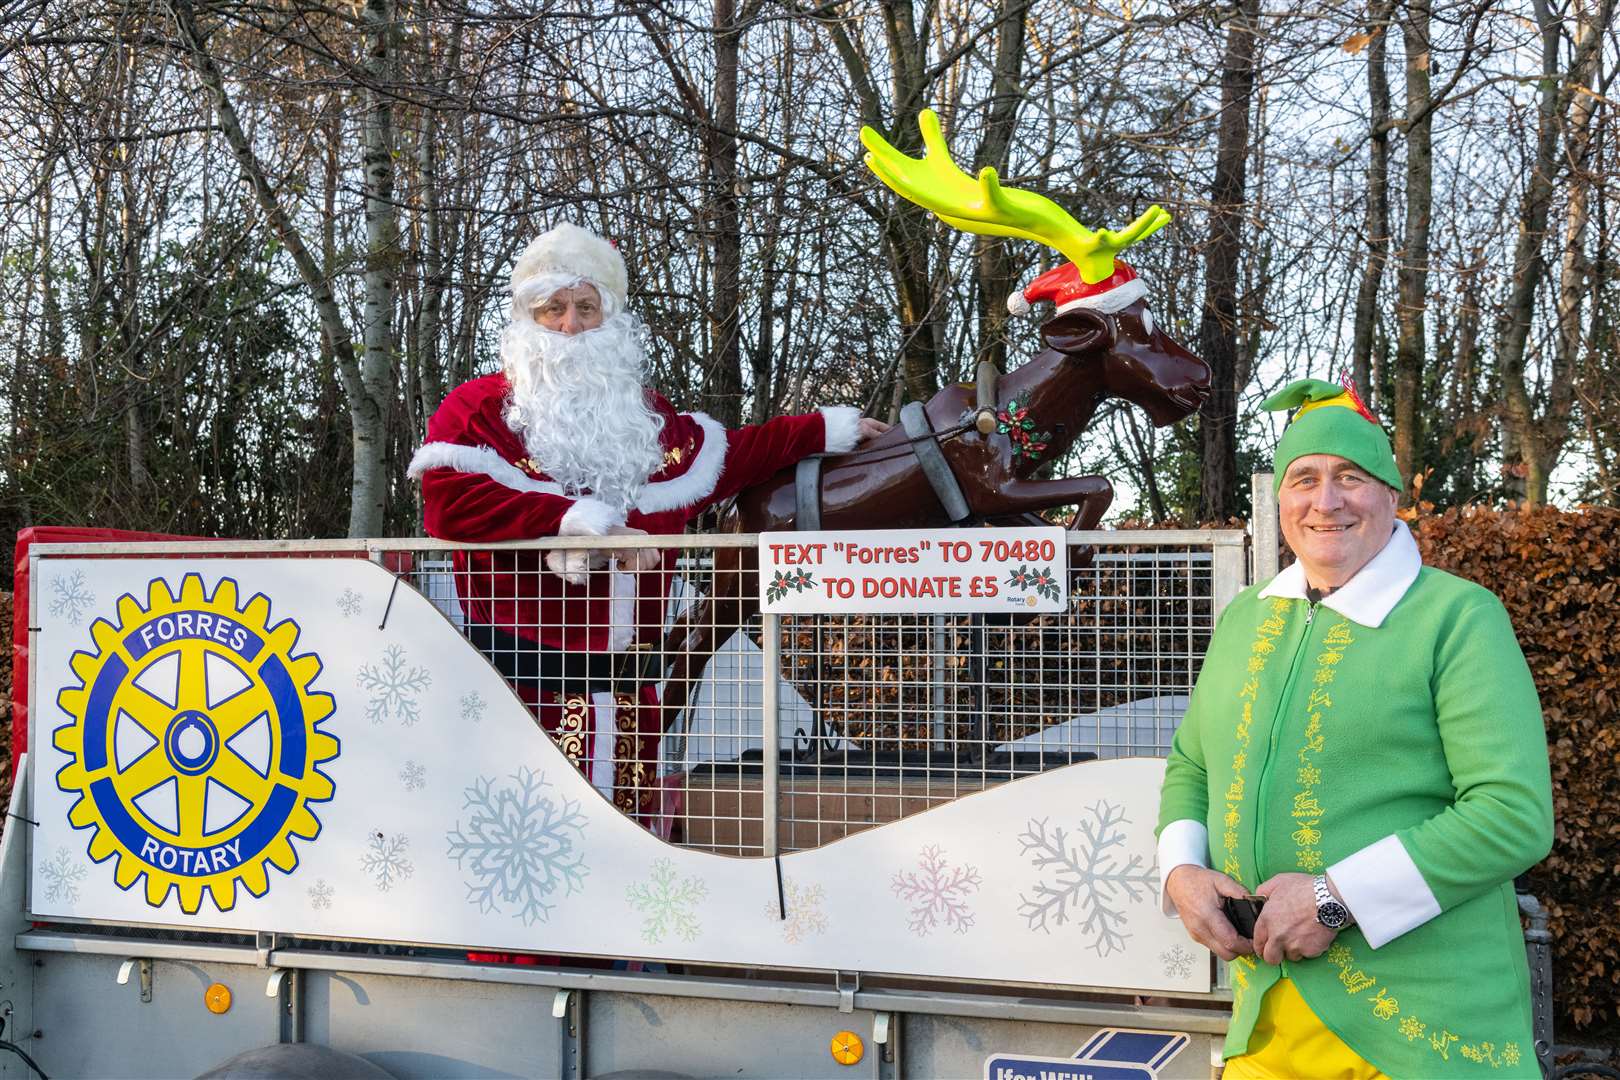 Santa and his chief elf Buddy with the sleigh.